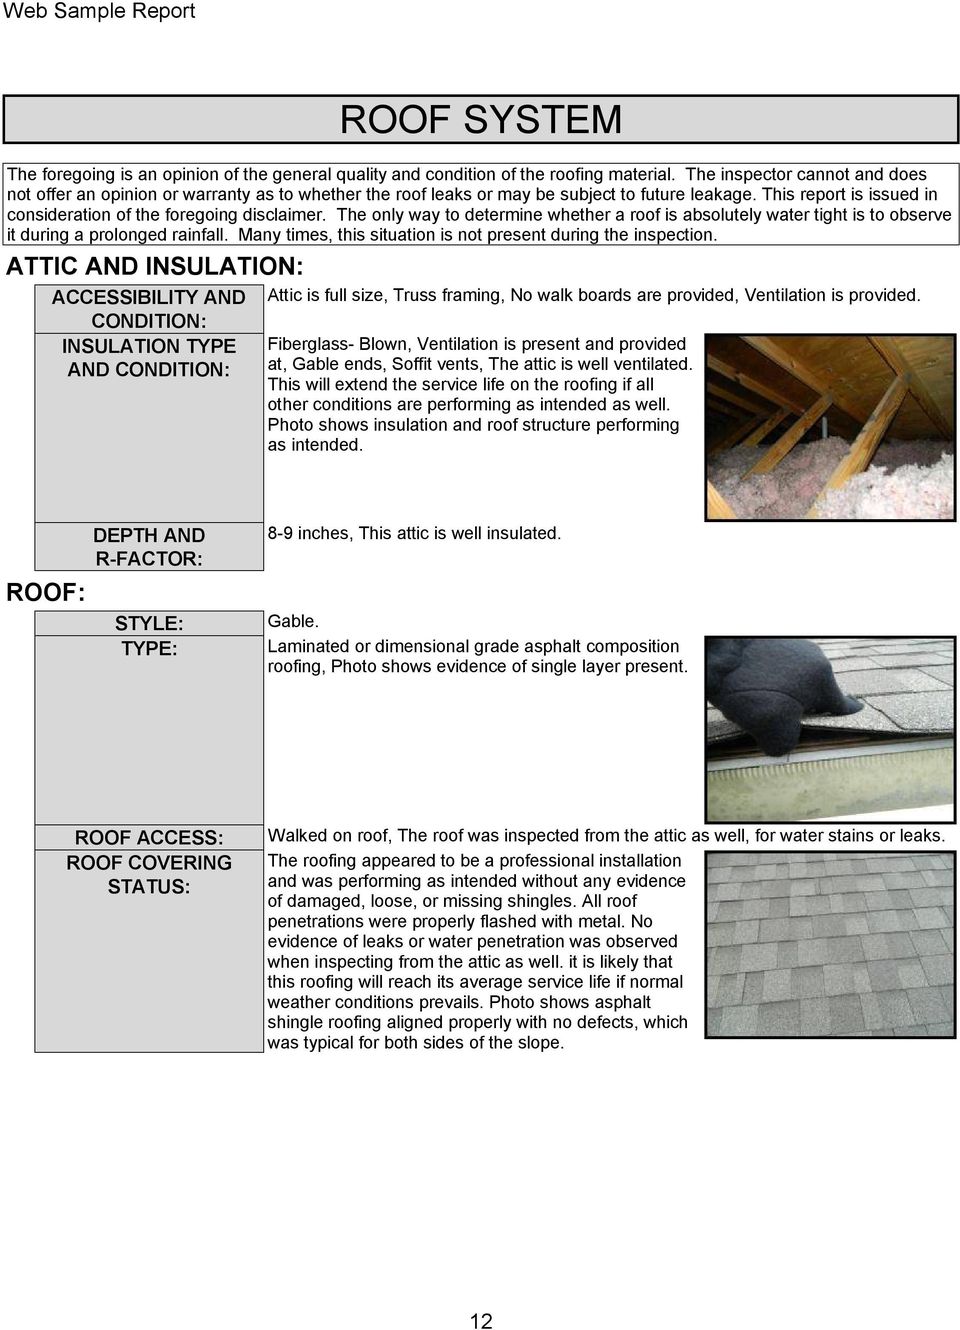 The only way to determine whether a roof is absolutely water tight is to observe it during a prolonged rainfall. Many times, this situation is not present during the inspection.